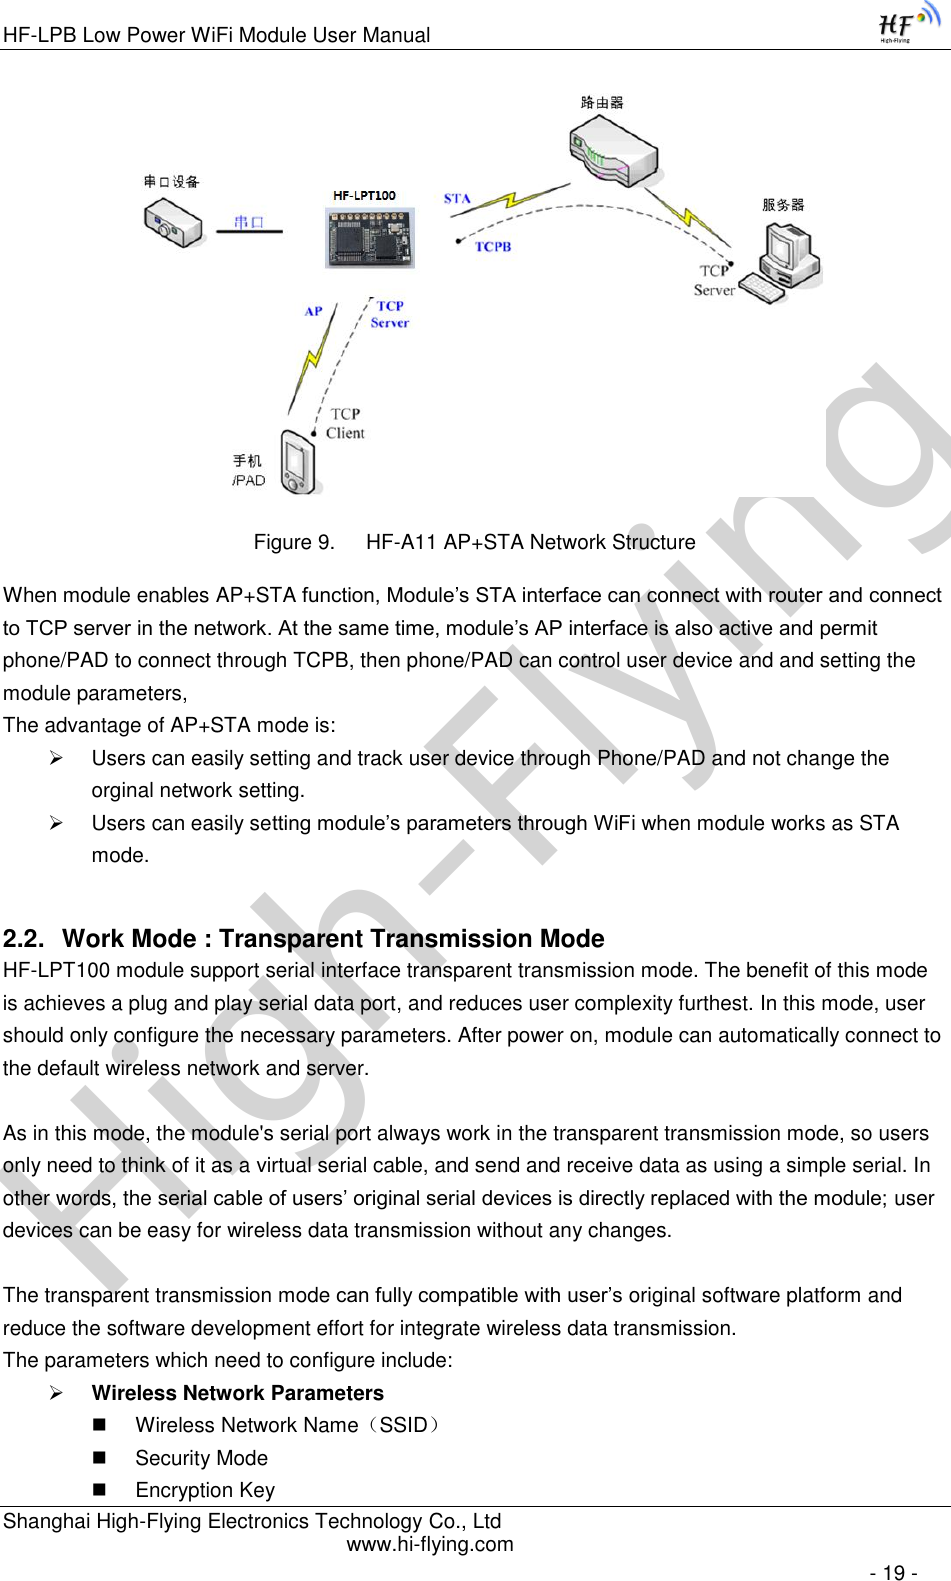 High-FlyingHF-LPB Low Power WiFi Module User Manual Shanghai High-Flying Electronics Technology Co., Ltd www.hi-flying.com   - 19 -  Figure 9. HF-A11 AP+STA Network Structure When module enables AP+STA function, Module’s STA interface can connect with router and connect to TCP server in the network. At the same time, module’s AP interface is also active and permit phone/PAD to connect through TCPB, then phone/PAD can control user device and and setting the module parameters, The advantage of AP+STA mode is:  Users can easily setting and track user device through Phone/PAD and not change the orginal network setting.  Users can easily setting module’s parameters through WiFi when module works as STA mode. 2.2. Work Mode : Transparent Transmission Mode HF-LPT100 module support serial interface transparent transmission mode. The benefit of this mode is achieves a plug and play serial data port, and reduces user complexity furthest. In this mode, user should only configure the necessary parameters. After power on, module can automatically connect to the default wireless network and server.   As in this mode, the module&apos;s serial port always work in the transparent transmission mode, so users only need to think of it as a virtual serial cable, and send and receive data as using a simple serial. In other words, the serial cable of users’ original serial devices is directly replaced with the module; user devices can be easy for wireless data transmission without any changes.  The transparent transmission mode can fully compatible with user’s original software platform and reduce the software development effort for integrate wireless data transmission. The parameters which need to configure include:  Wireless Network Parameters  Wireless Network Name（SSID）  Security Mode  Encryption Key 